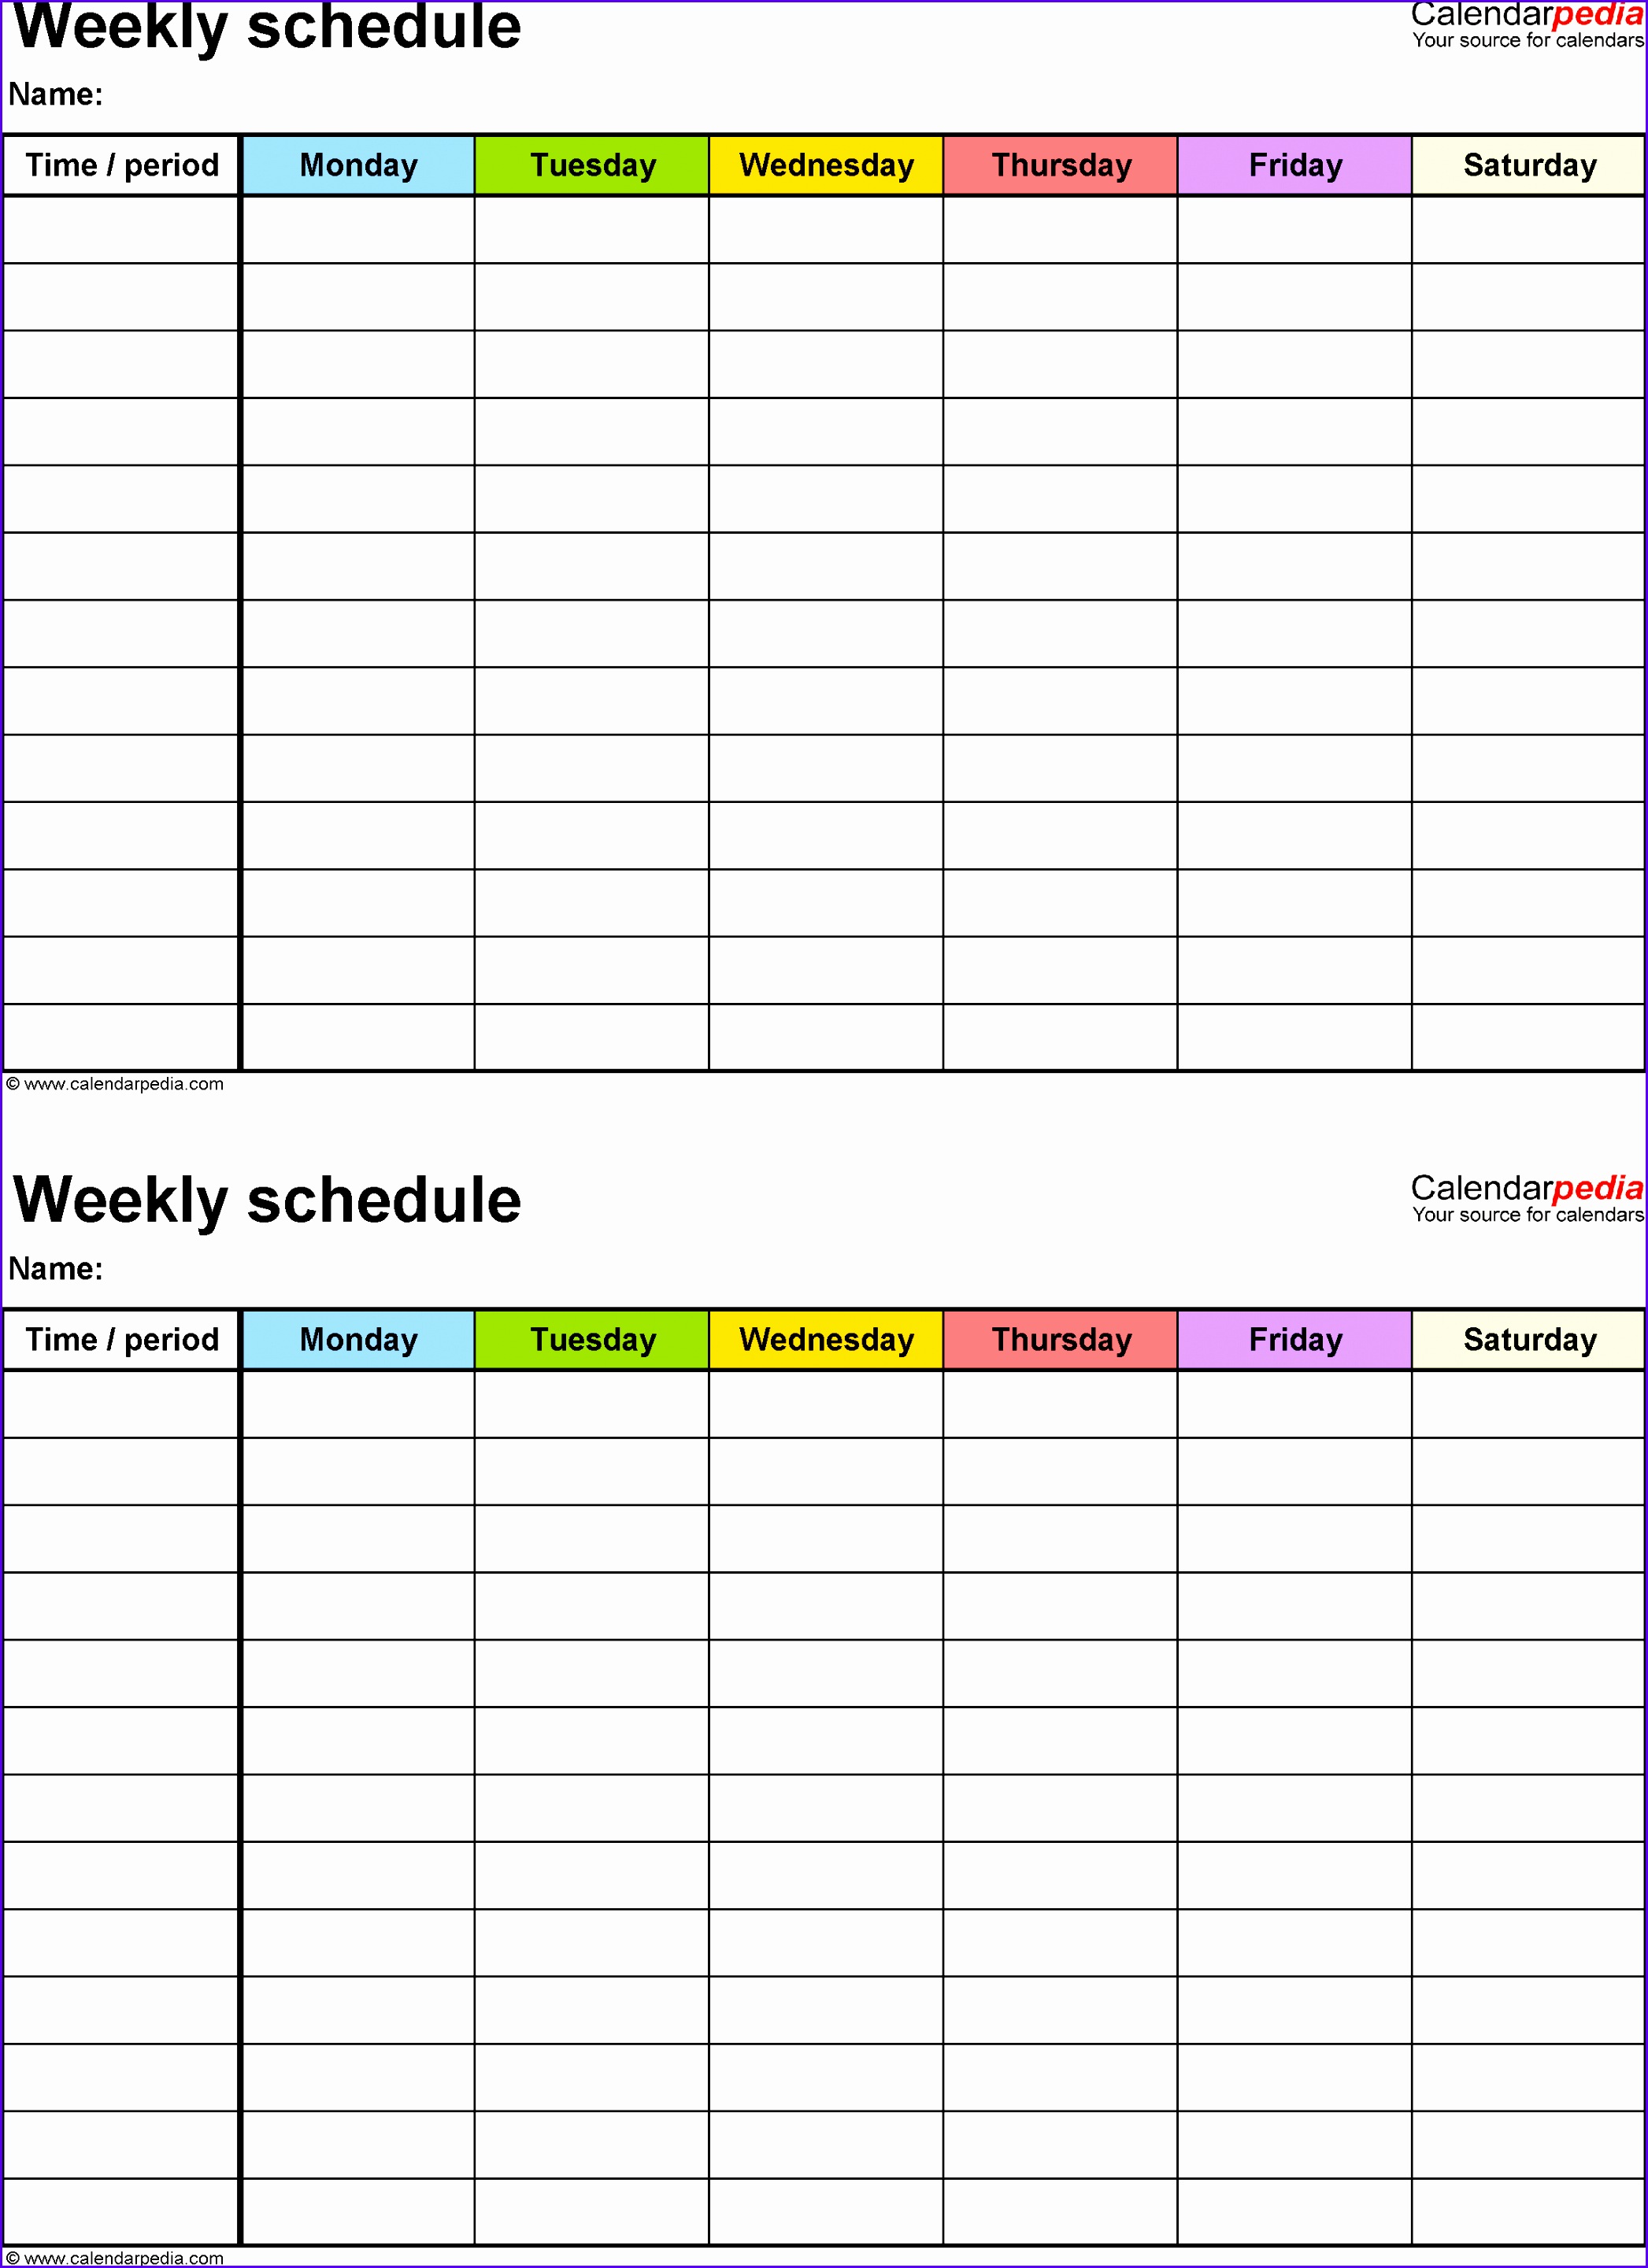 Weekly schedule template for Excel version 9 2 schedules on one page portrait 20932881